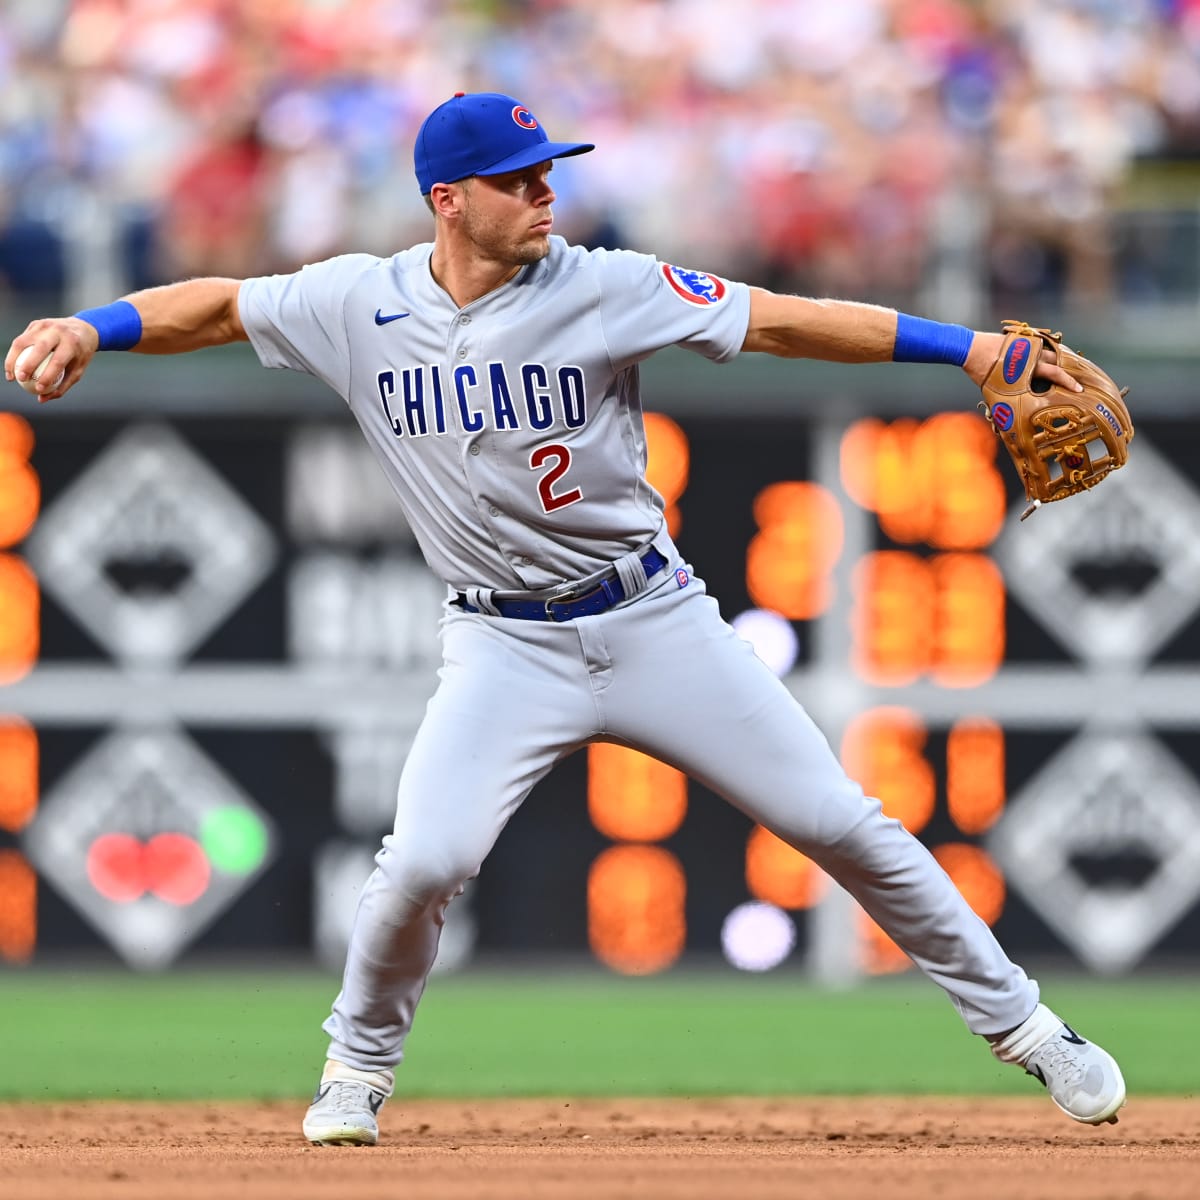 TORONTO, ON - AUGUST 12: Chicago Cubs second baseman Nico Hoerner (2)  throws the ball to first base for the out during the MLB regular season  game between the Chicago Cubs and